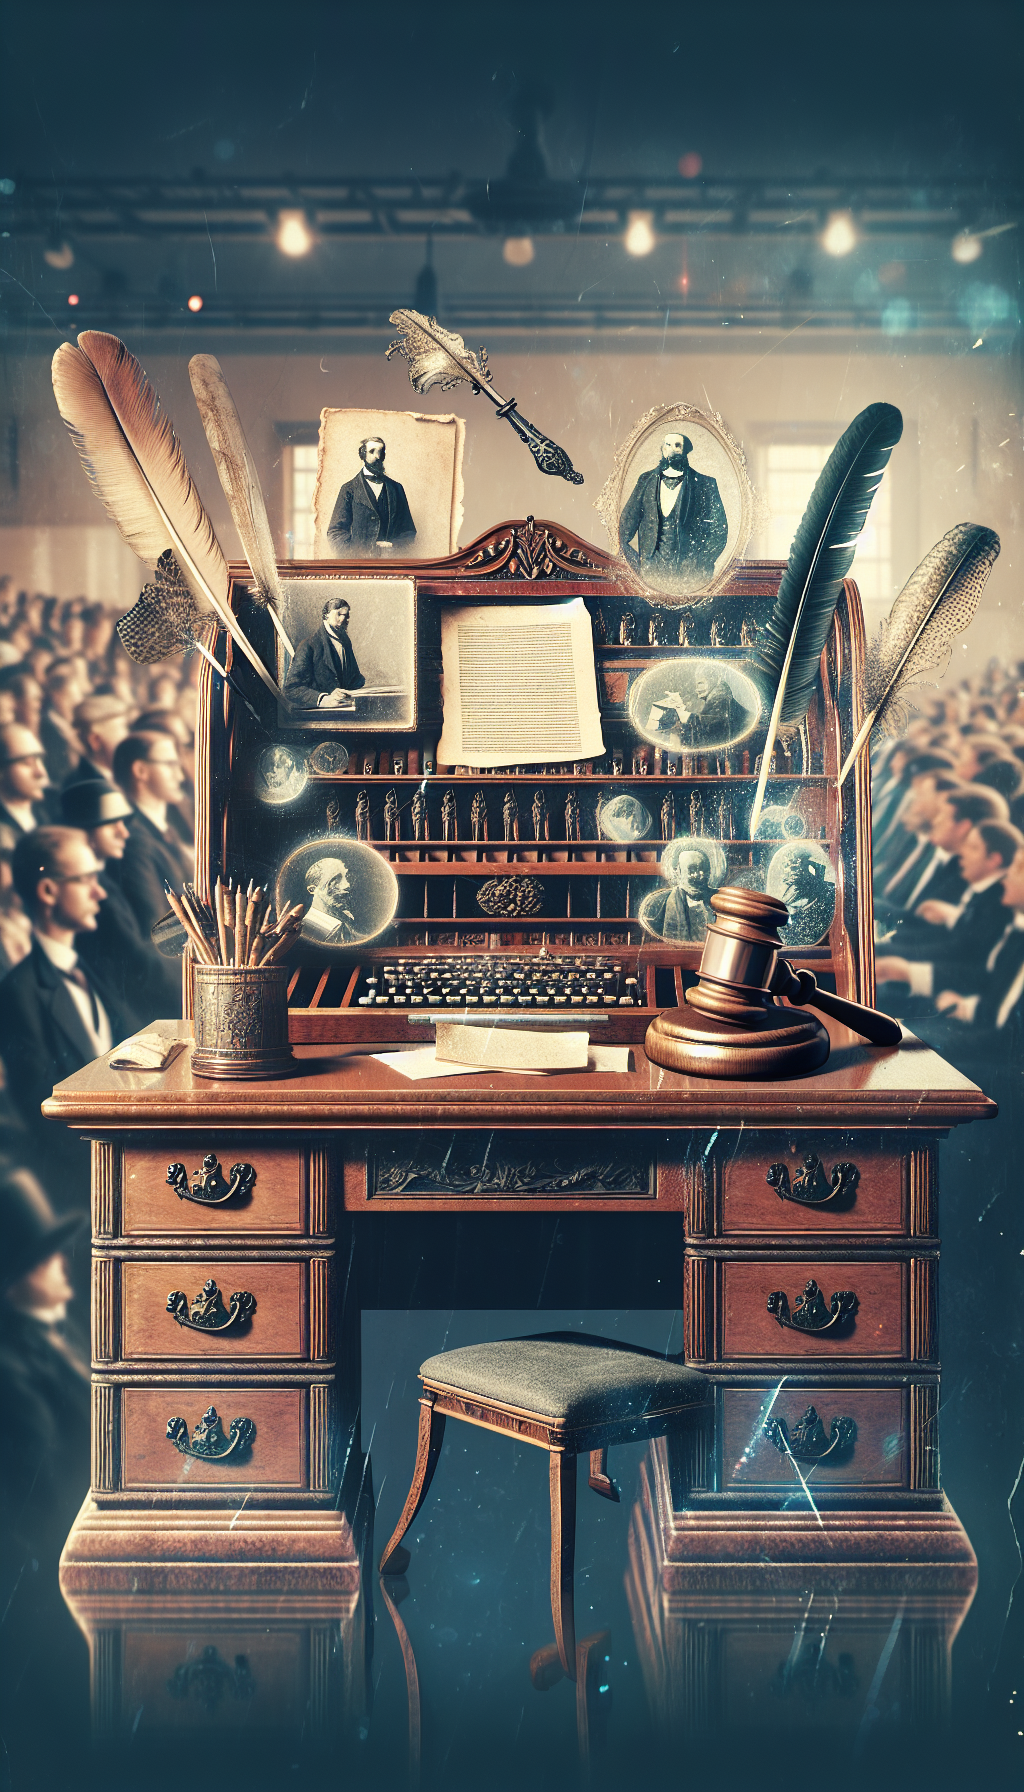 A vintage secretary desk stands prominently, its drawers overflowing with illustrious manuscripts and precious quills. Echoing in the background, translucent figures of historical icons pen letters, while a looming gavel hints at a bustling auction scene. The entire image is overlaid with a shimmering patina, symbolizing the desk's age and desirability, set against a backdrop of admiring crowds.